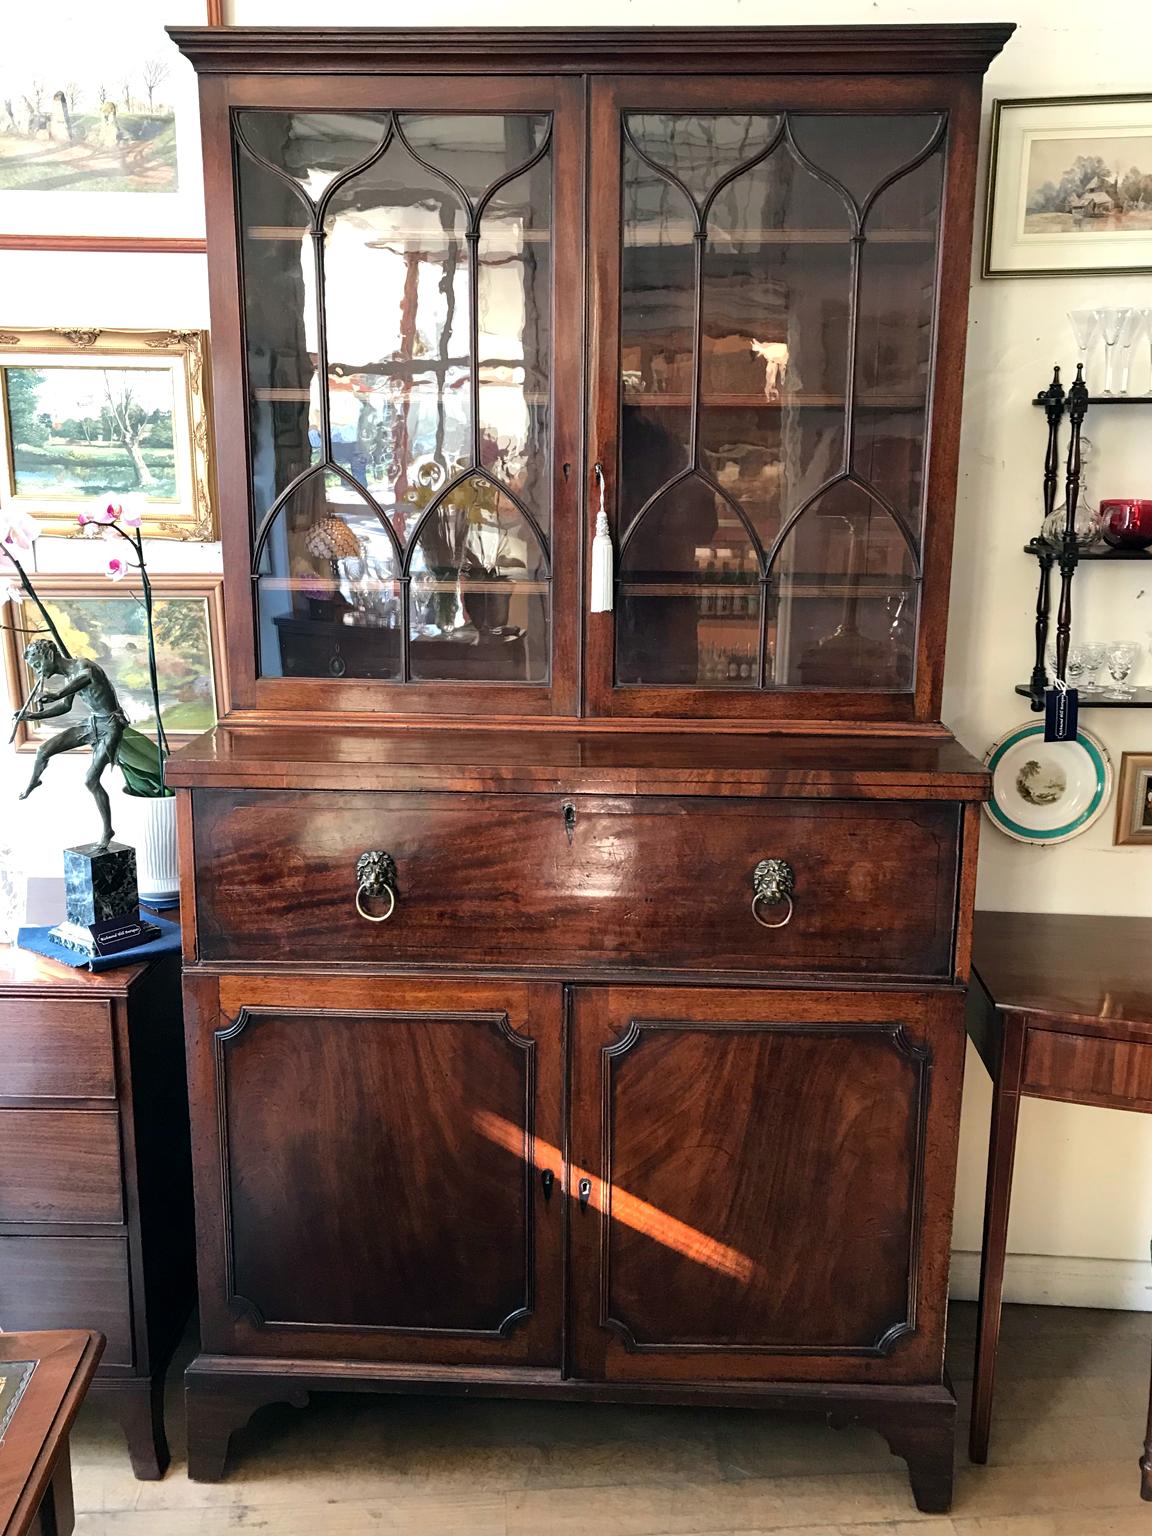 A high quality 18th century Georgian mahogany secrétaire bookcase / cupboard with two glazed doors with adjustable sliding shelves. The pullout / pull-out secretaire drawer with solid brass lion handles incloses a fitted interior with pigeon holes